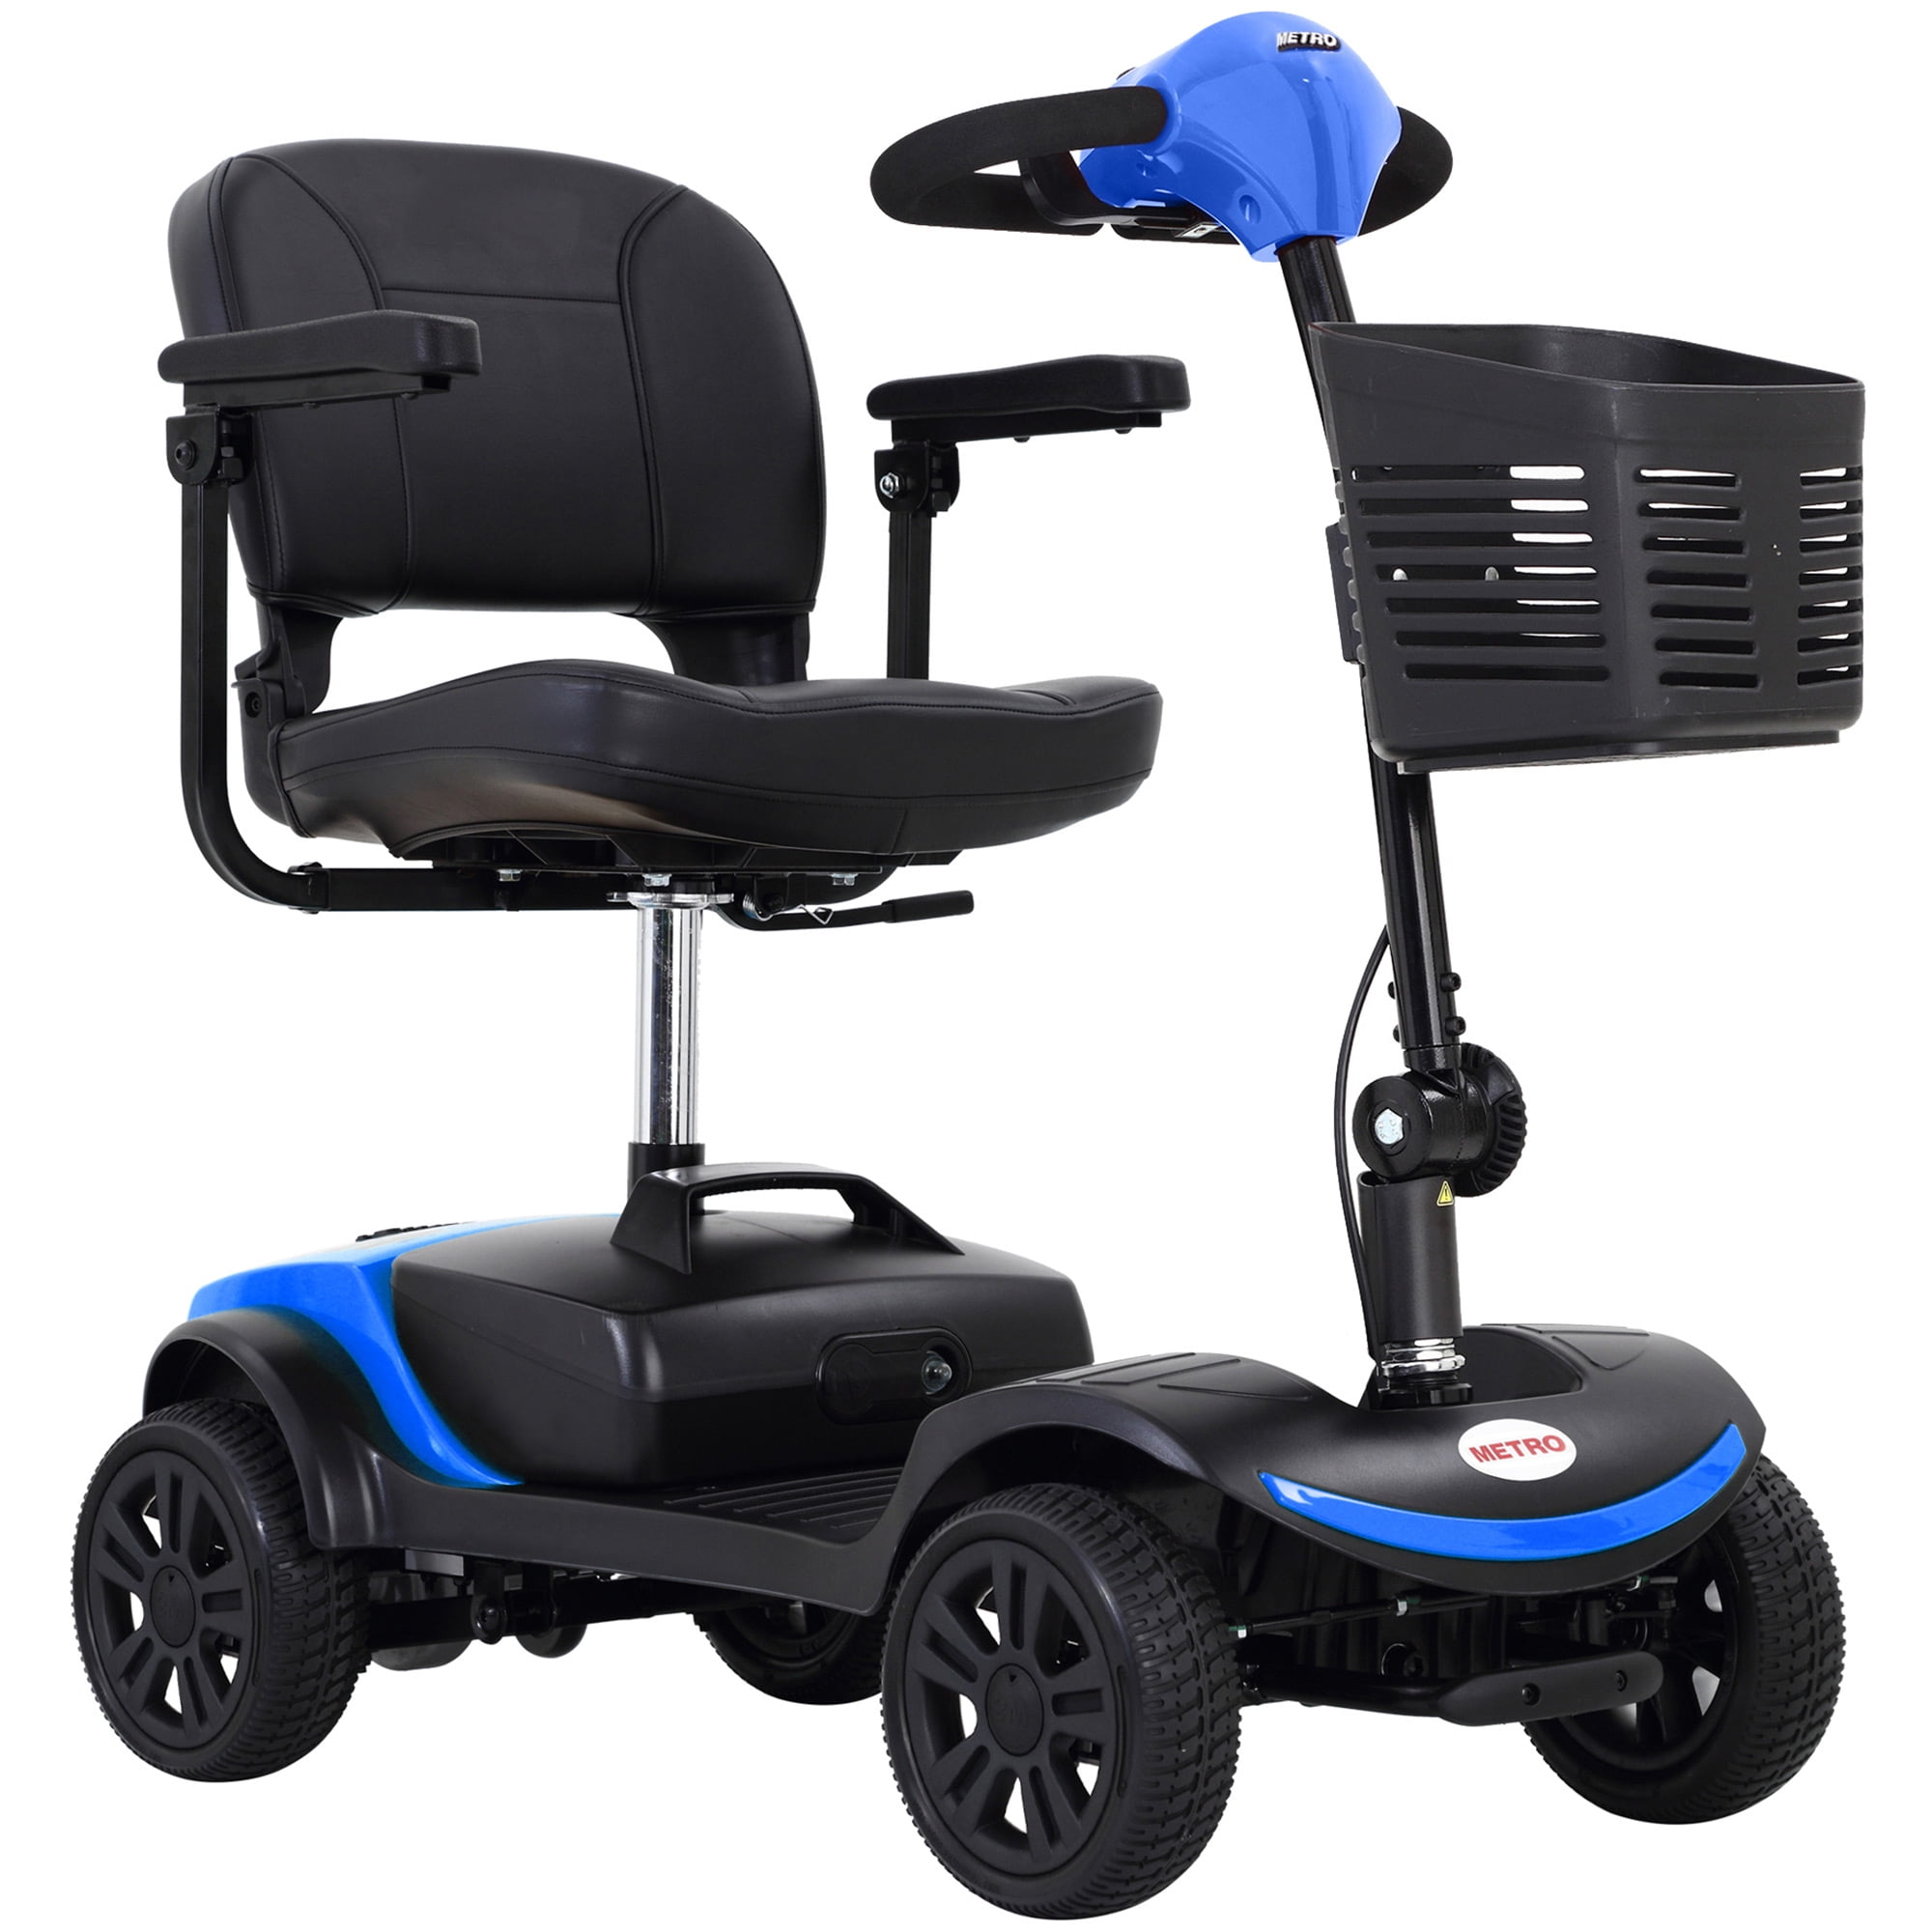 Planlagt is Brace Electric Mobility Scooters, Heavy Duty Electric Scooters with 4 Wheel,  Outdoor Compact Travel Scooter With Anti-Tip wheels, Compact Motorized Mobility  Scooter for Adults, Blue, SS573 - Walmart.com